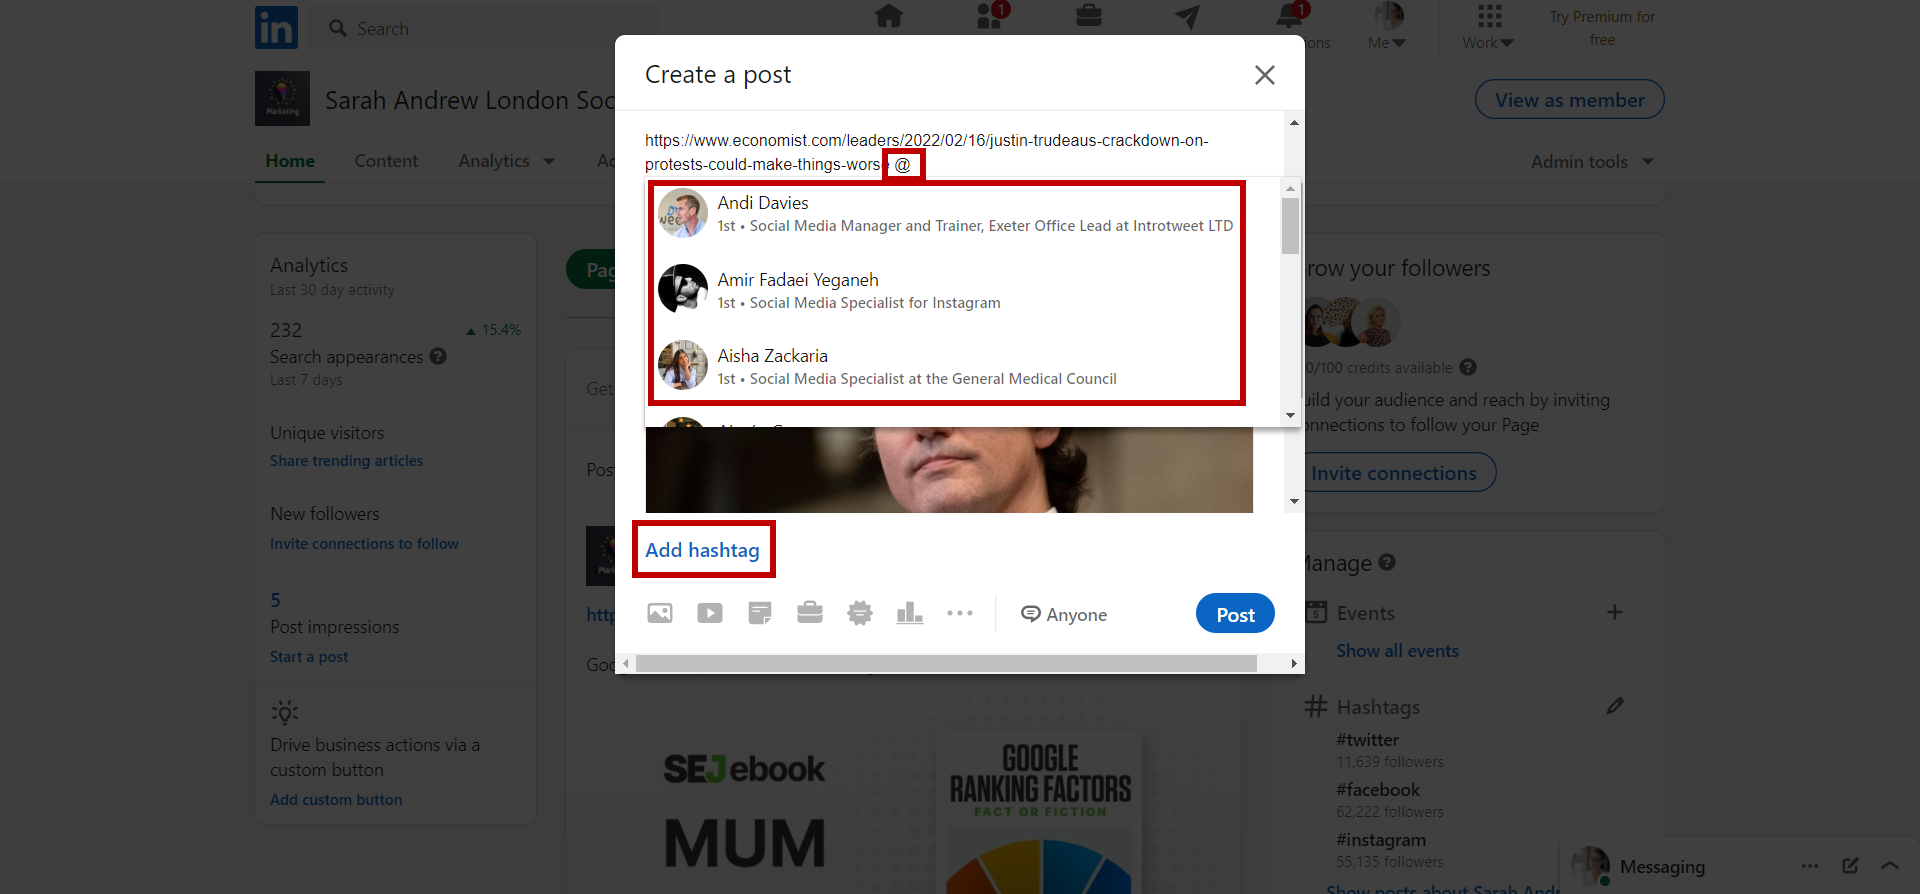 You can tag people or use hashtags to reach more audience with your article on LinkedIn